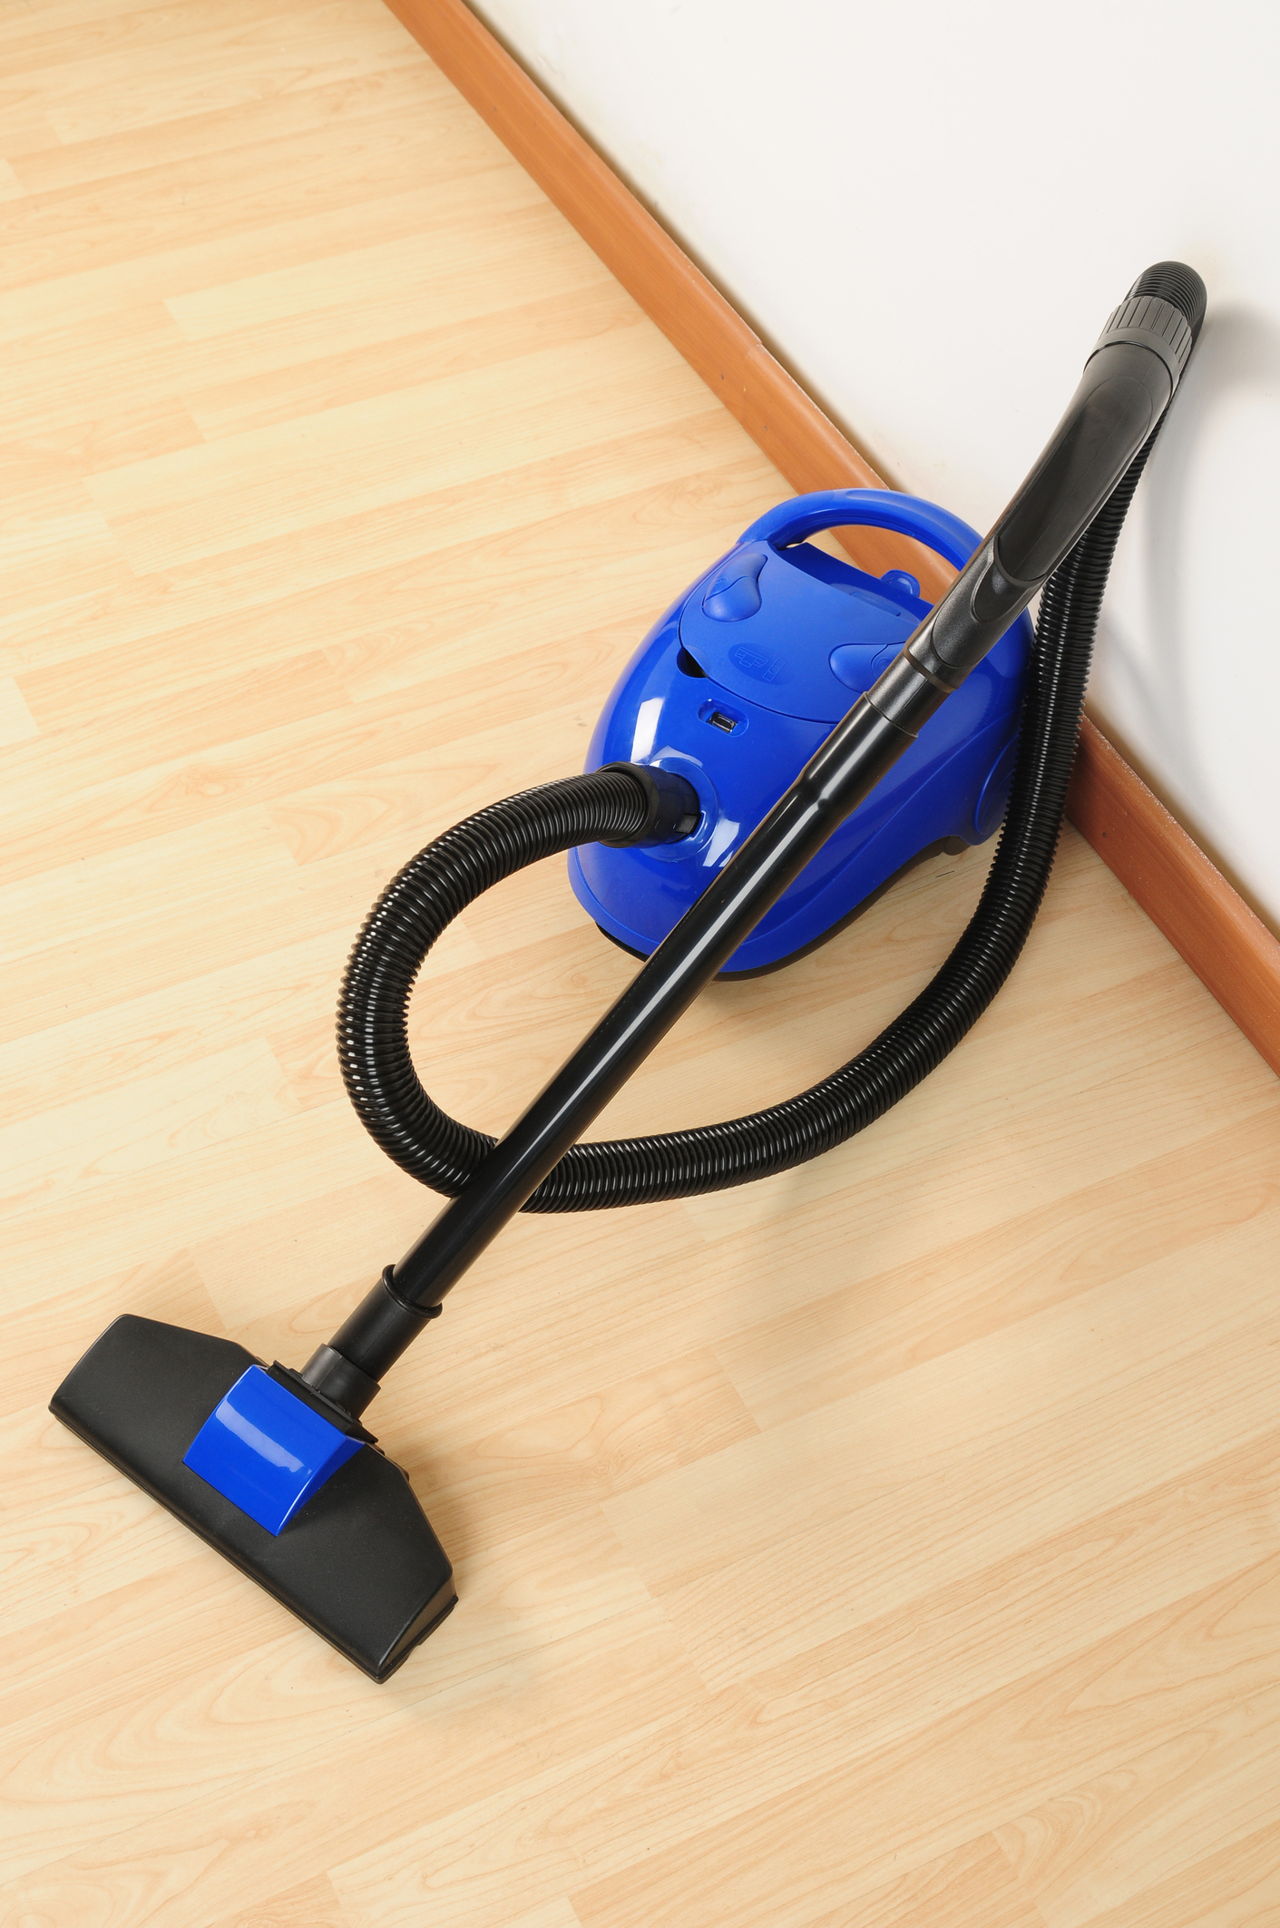 Clean Laminate Floors Without Streaking, Clean Laminate Floors Without Streaking